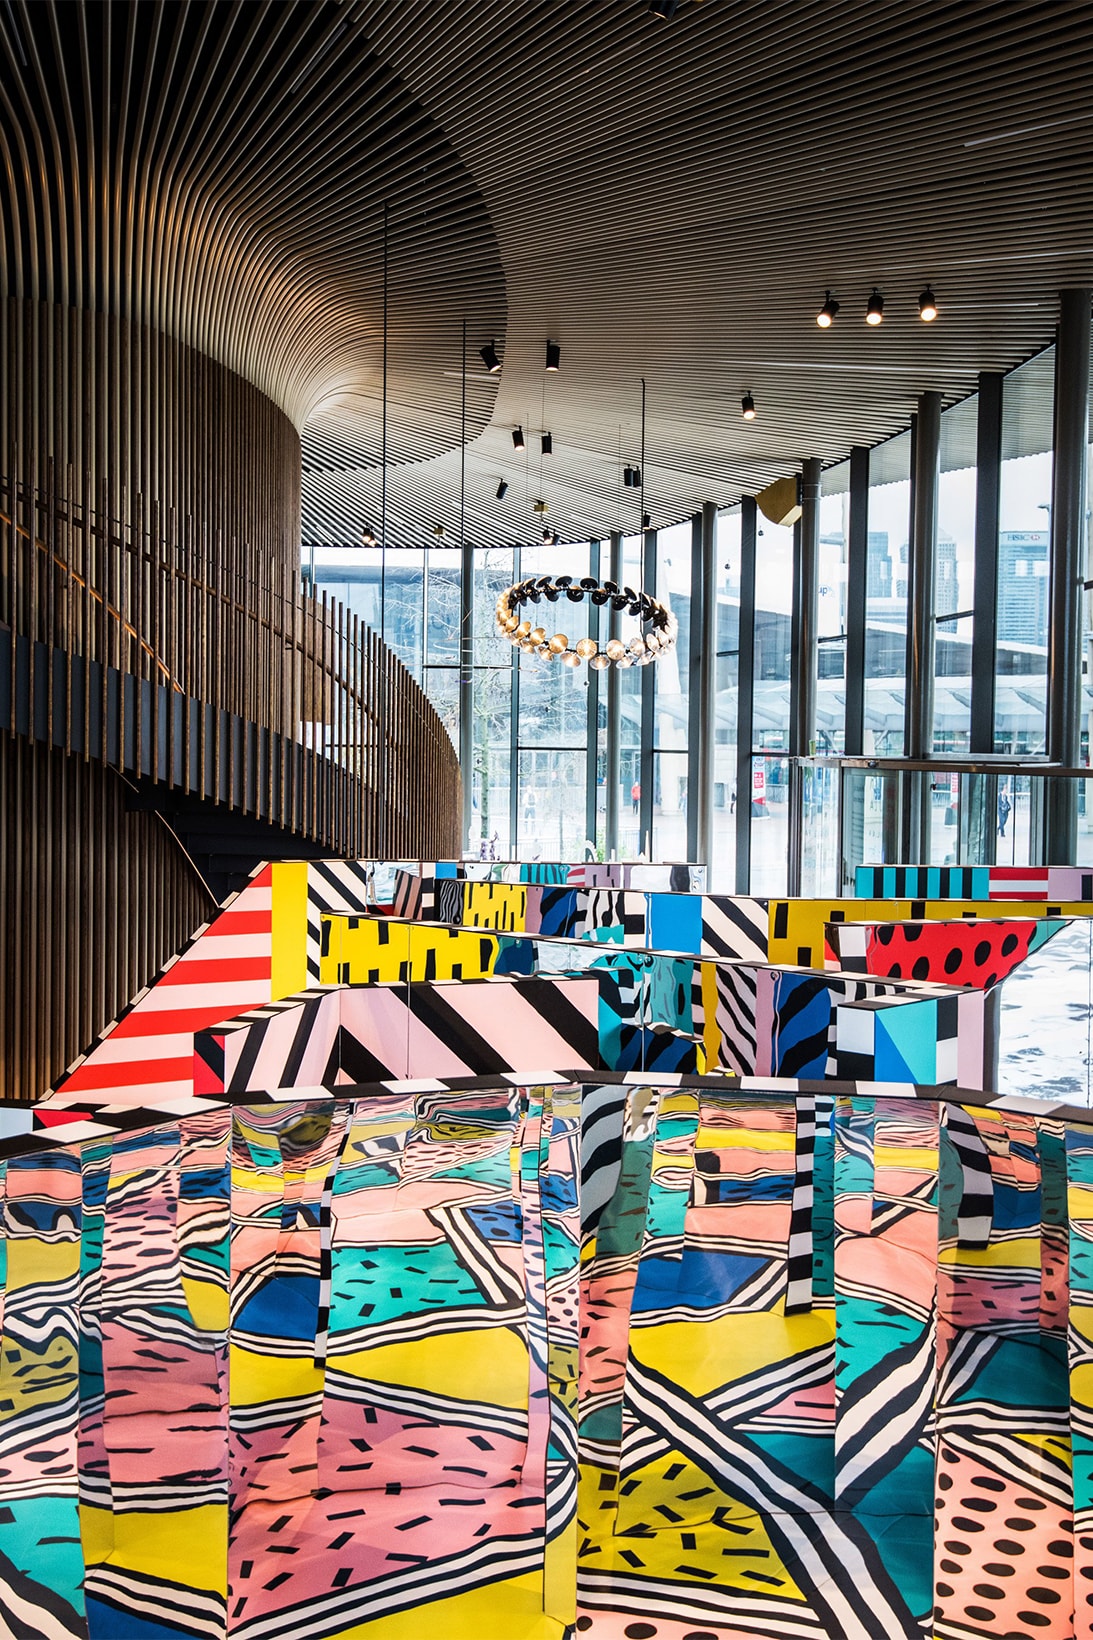 Camille Walala Temple to Wonder NOW Gallery London Art Exhibition 2017 July Summer